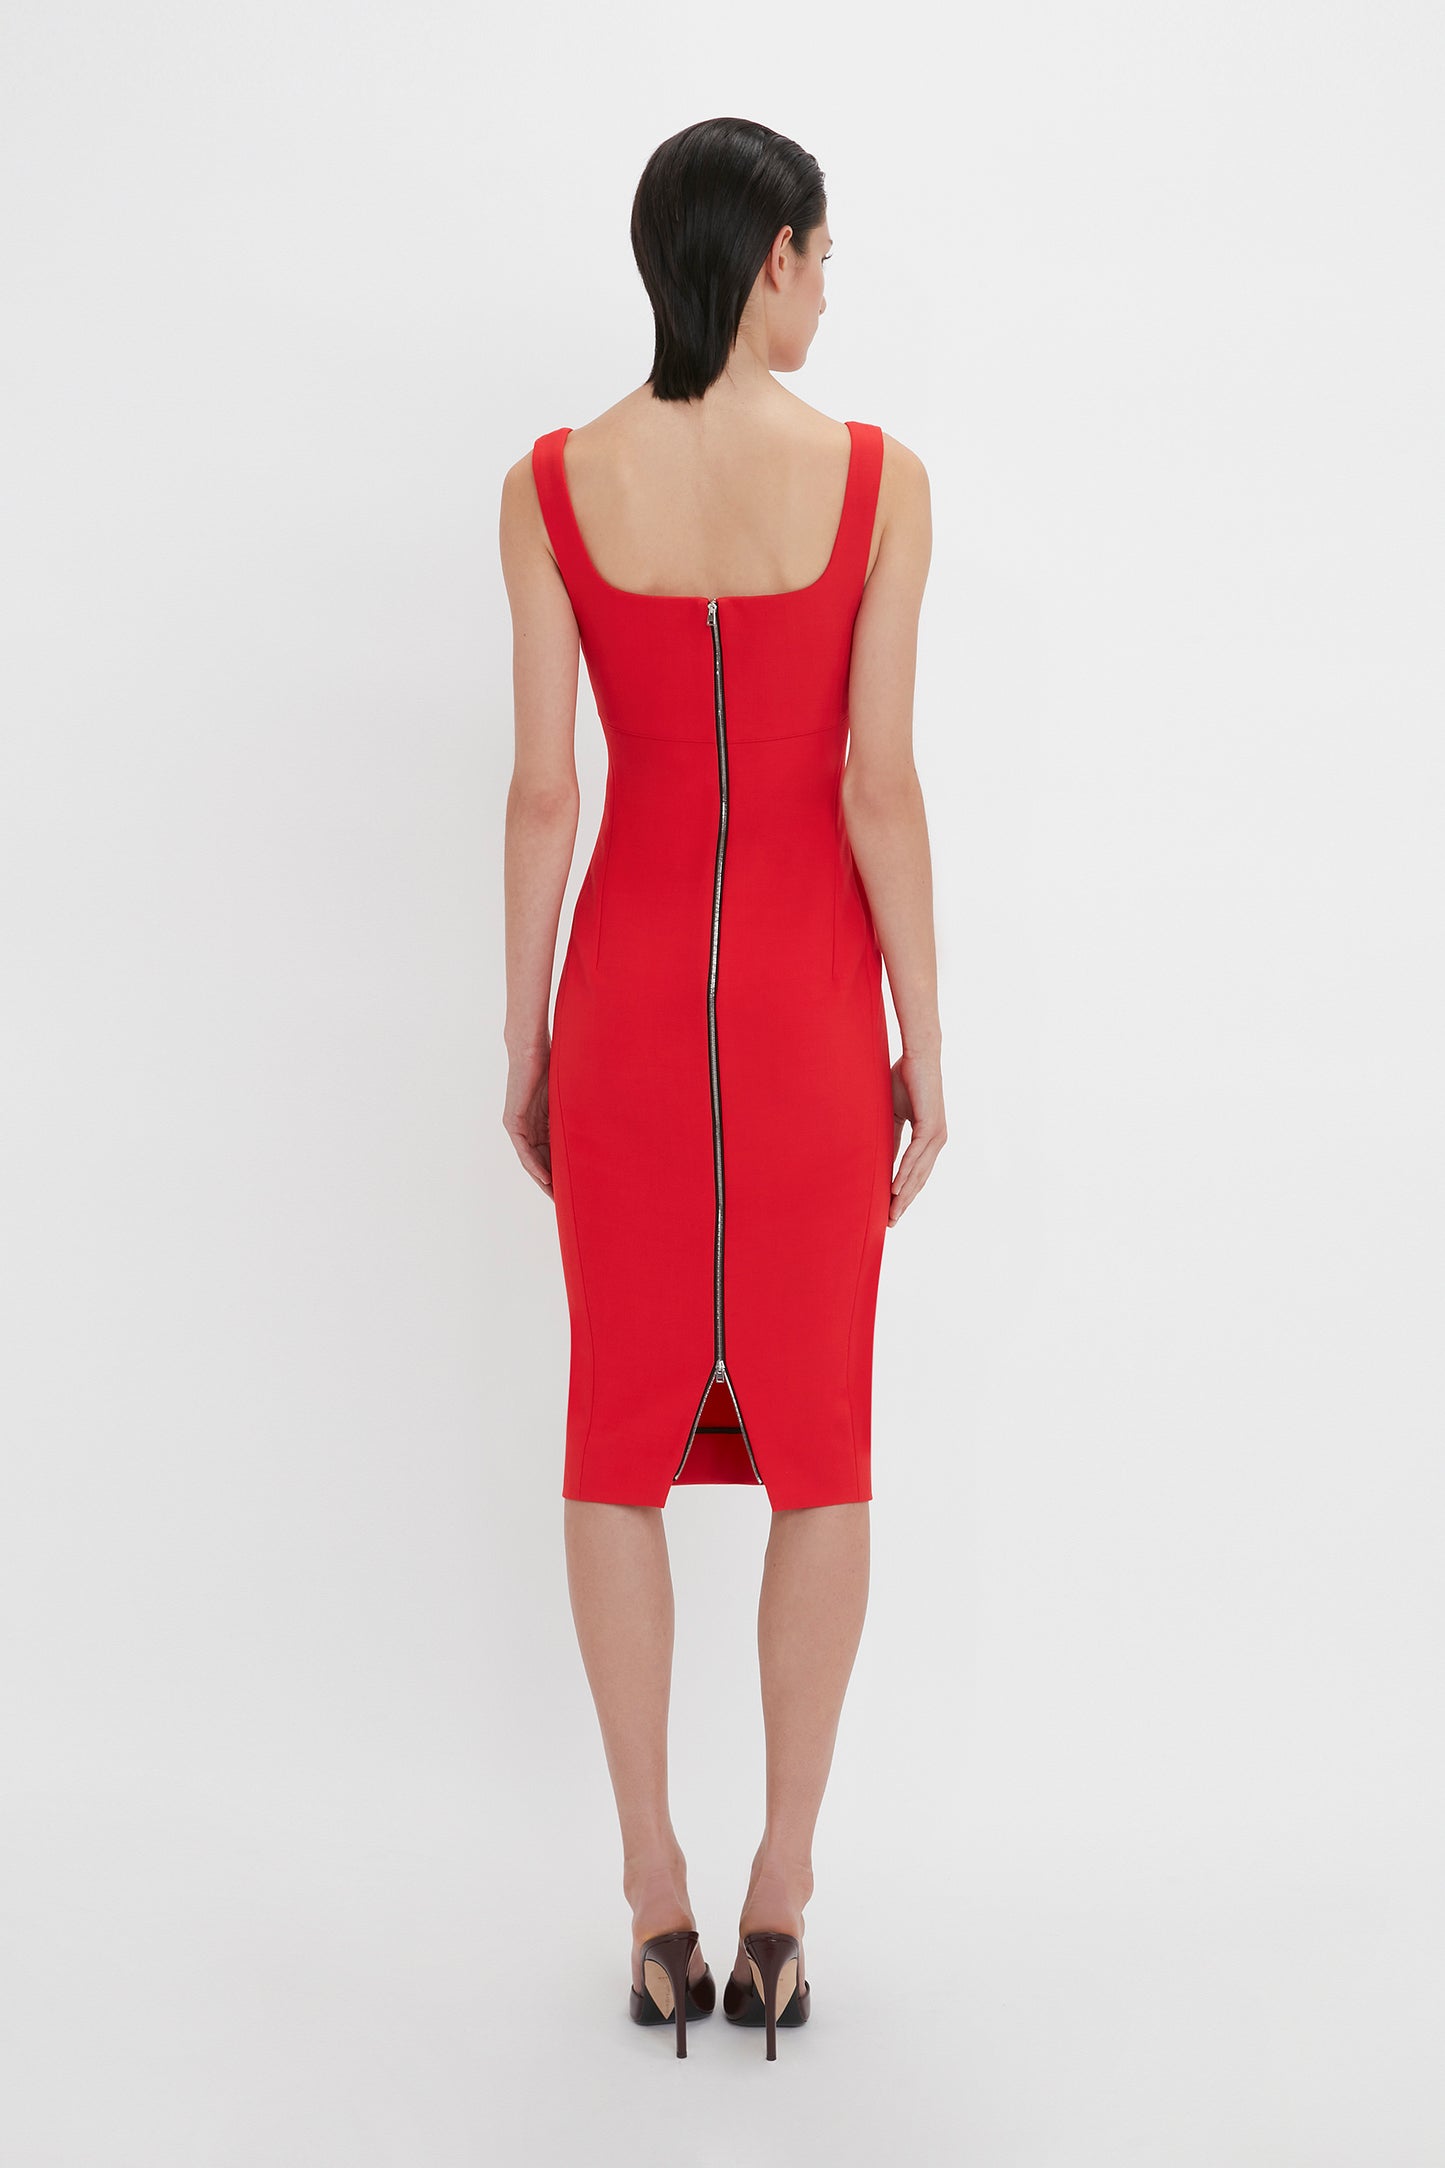 A person in a Sleeveless Fitted T-Shirt Dress In Bright Red by Victoria Beckham standing with their back to the camera, showcasing a visible zipper running from the neckline to the knee-length hem. Made from double wool crepe, the dress has wide shoulder straps.